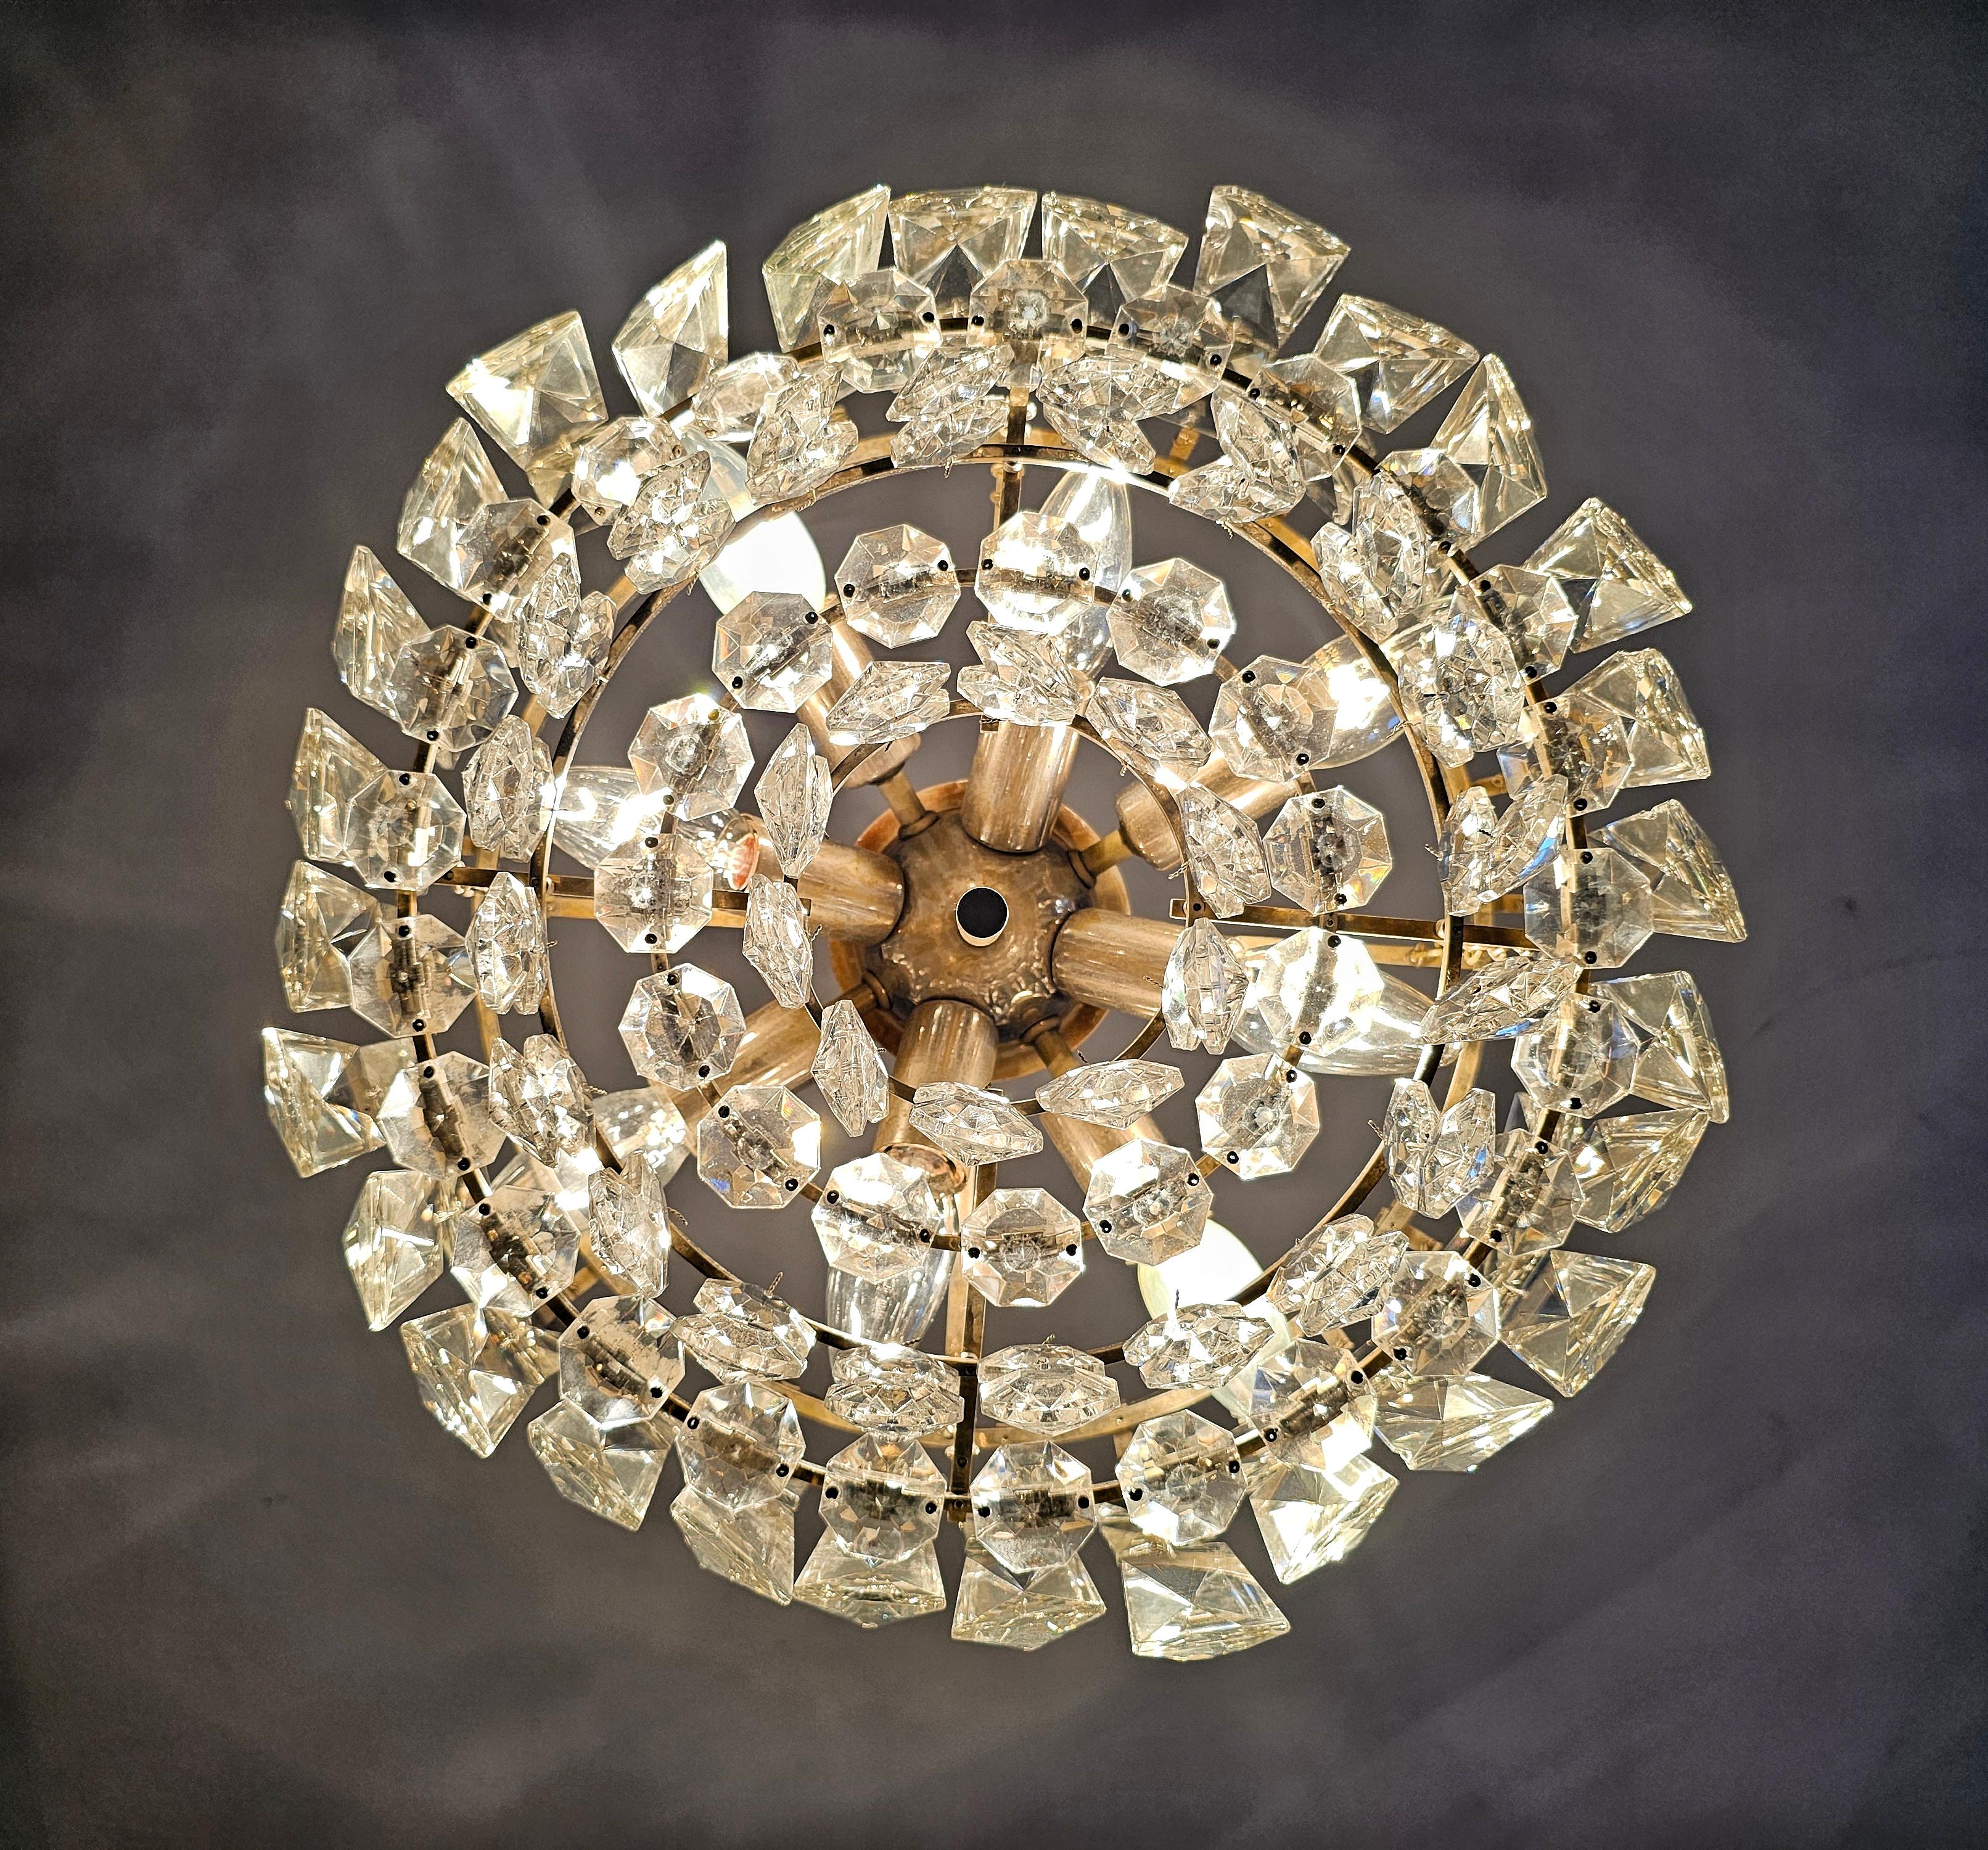 Mid Century Modern Nickel Plated Crystal Chandelier by Bakalowits, Austria 1960s For Sale 5